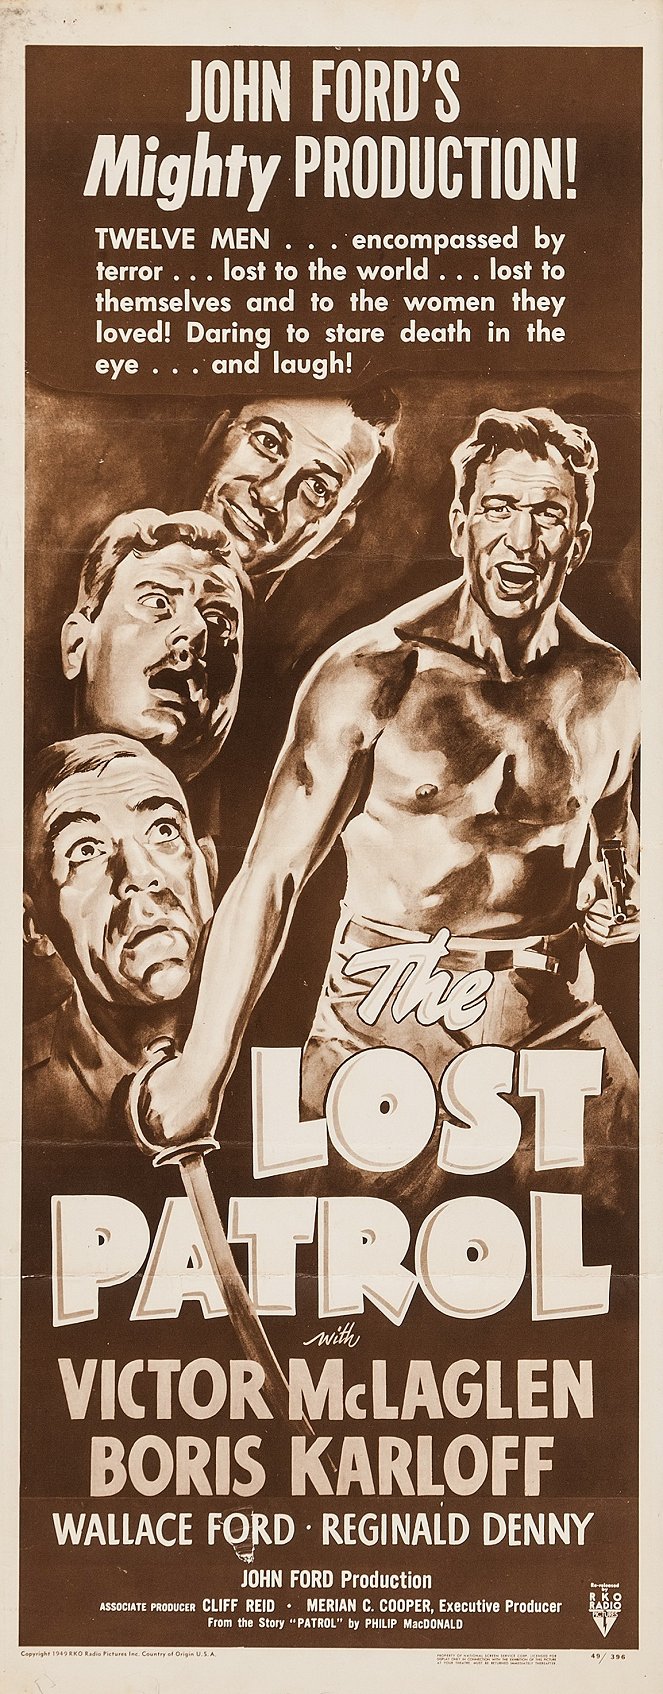 The Lost Patrol - Posters